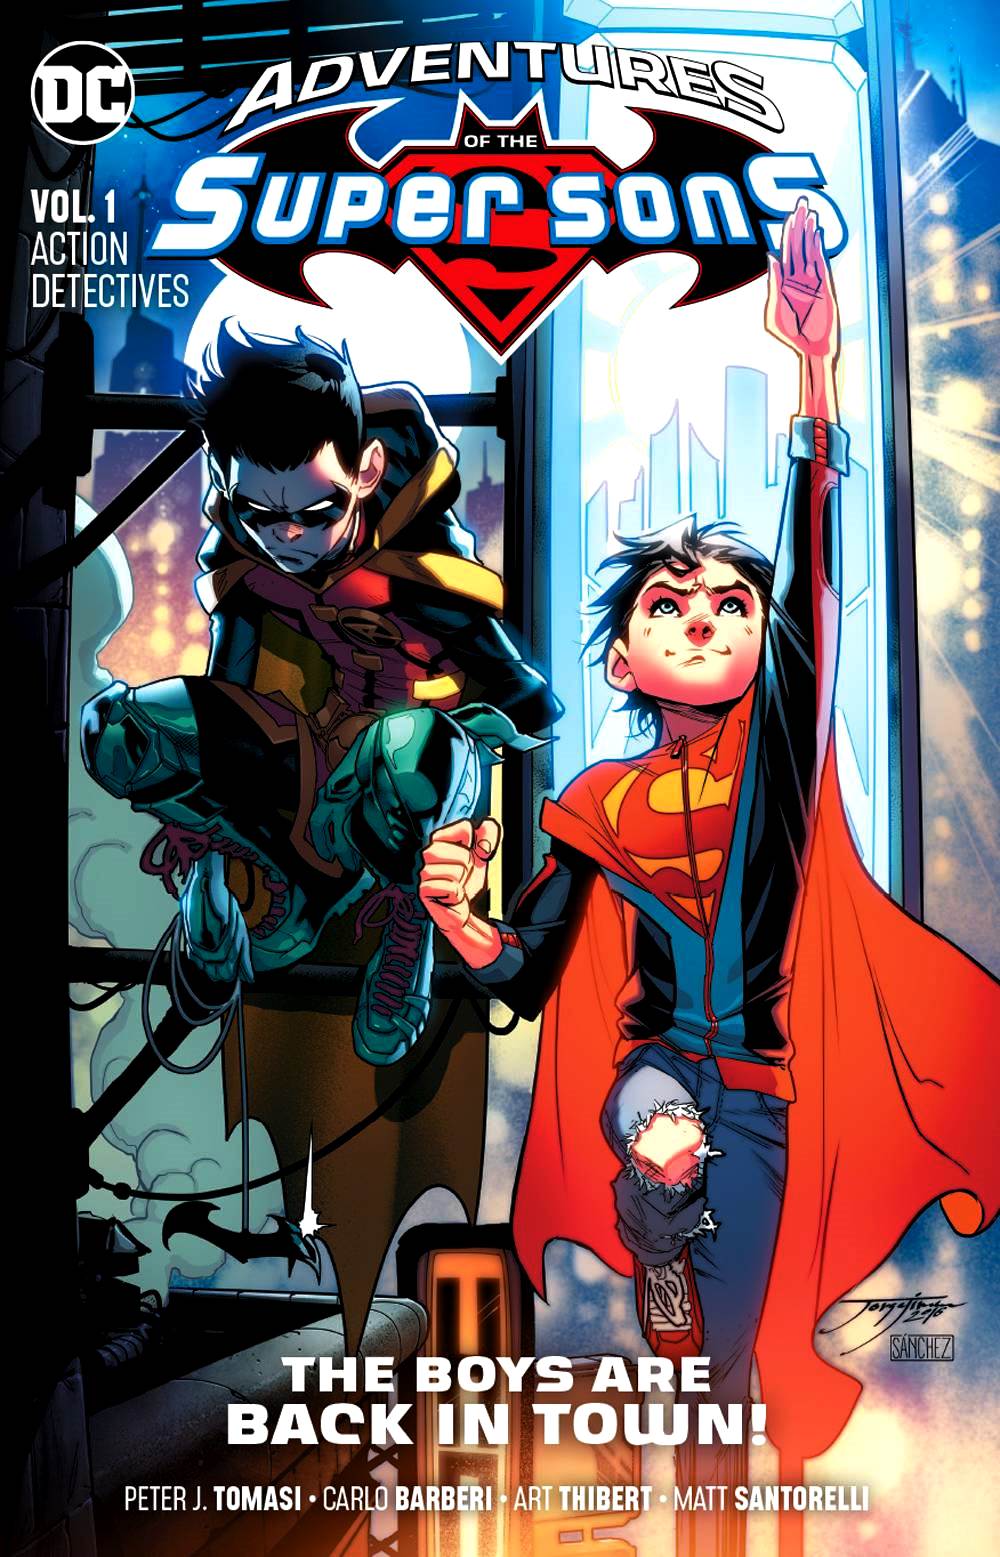 Adventures of the Super Sons (2018) Volume 1: Action Detective